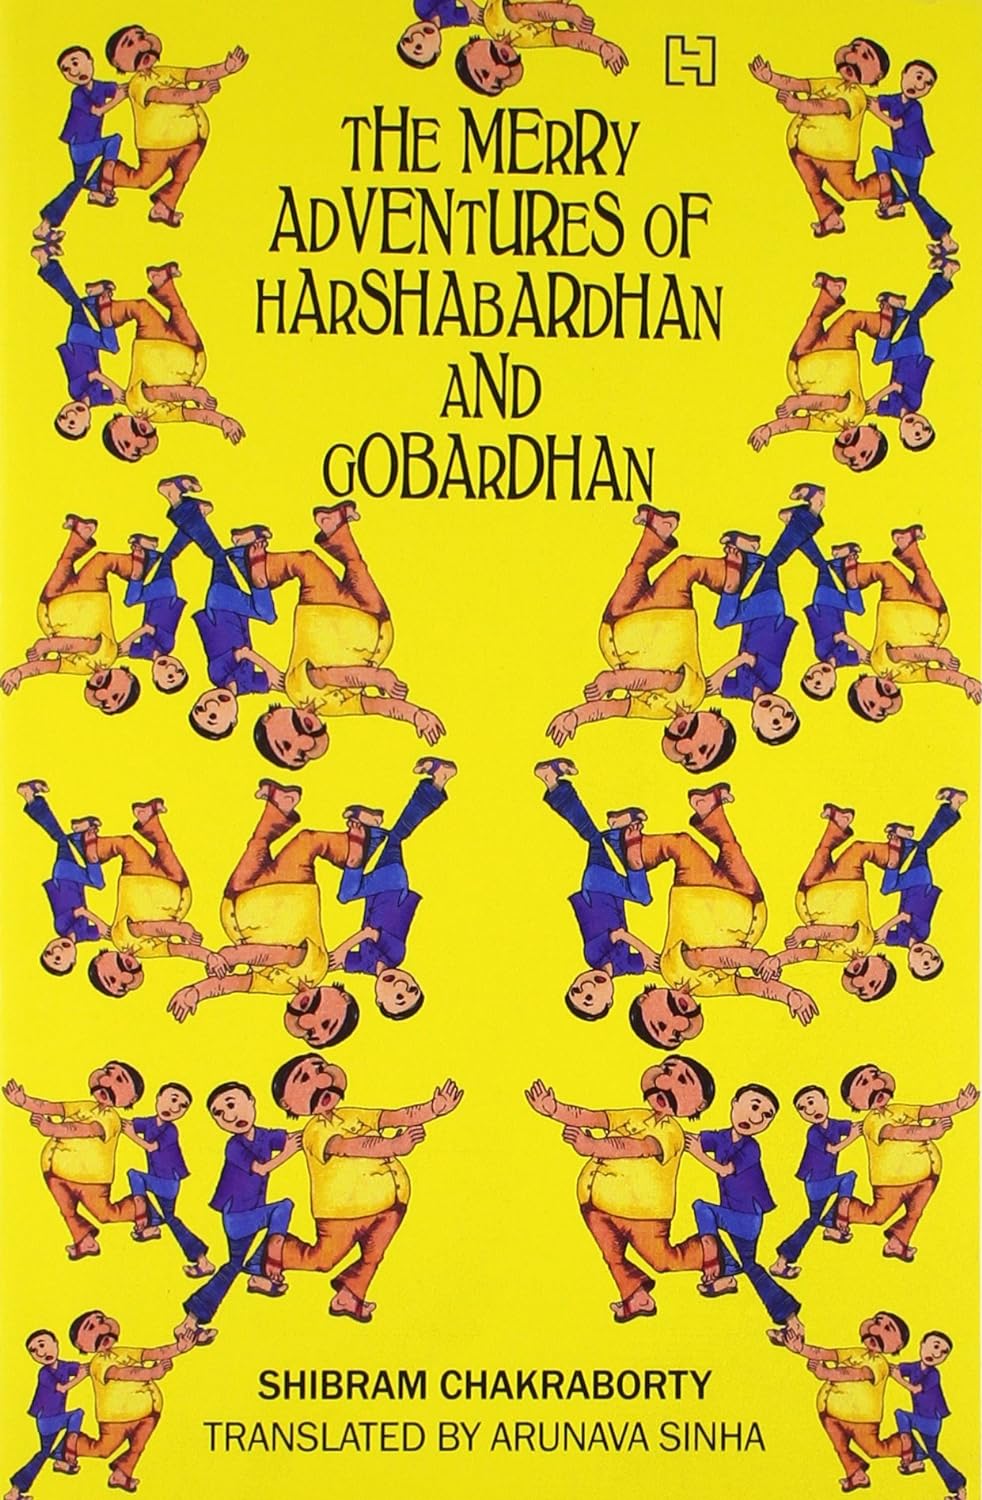 The Merry Adventures of Harshabardhan and Gobardhan